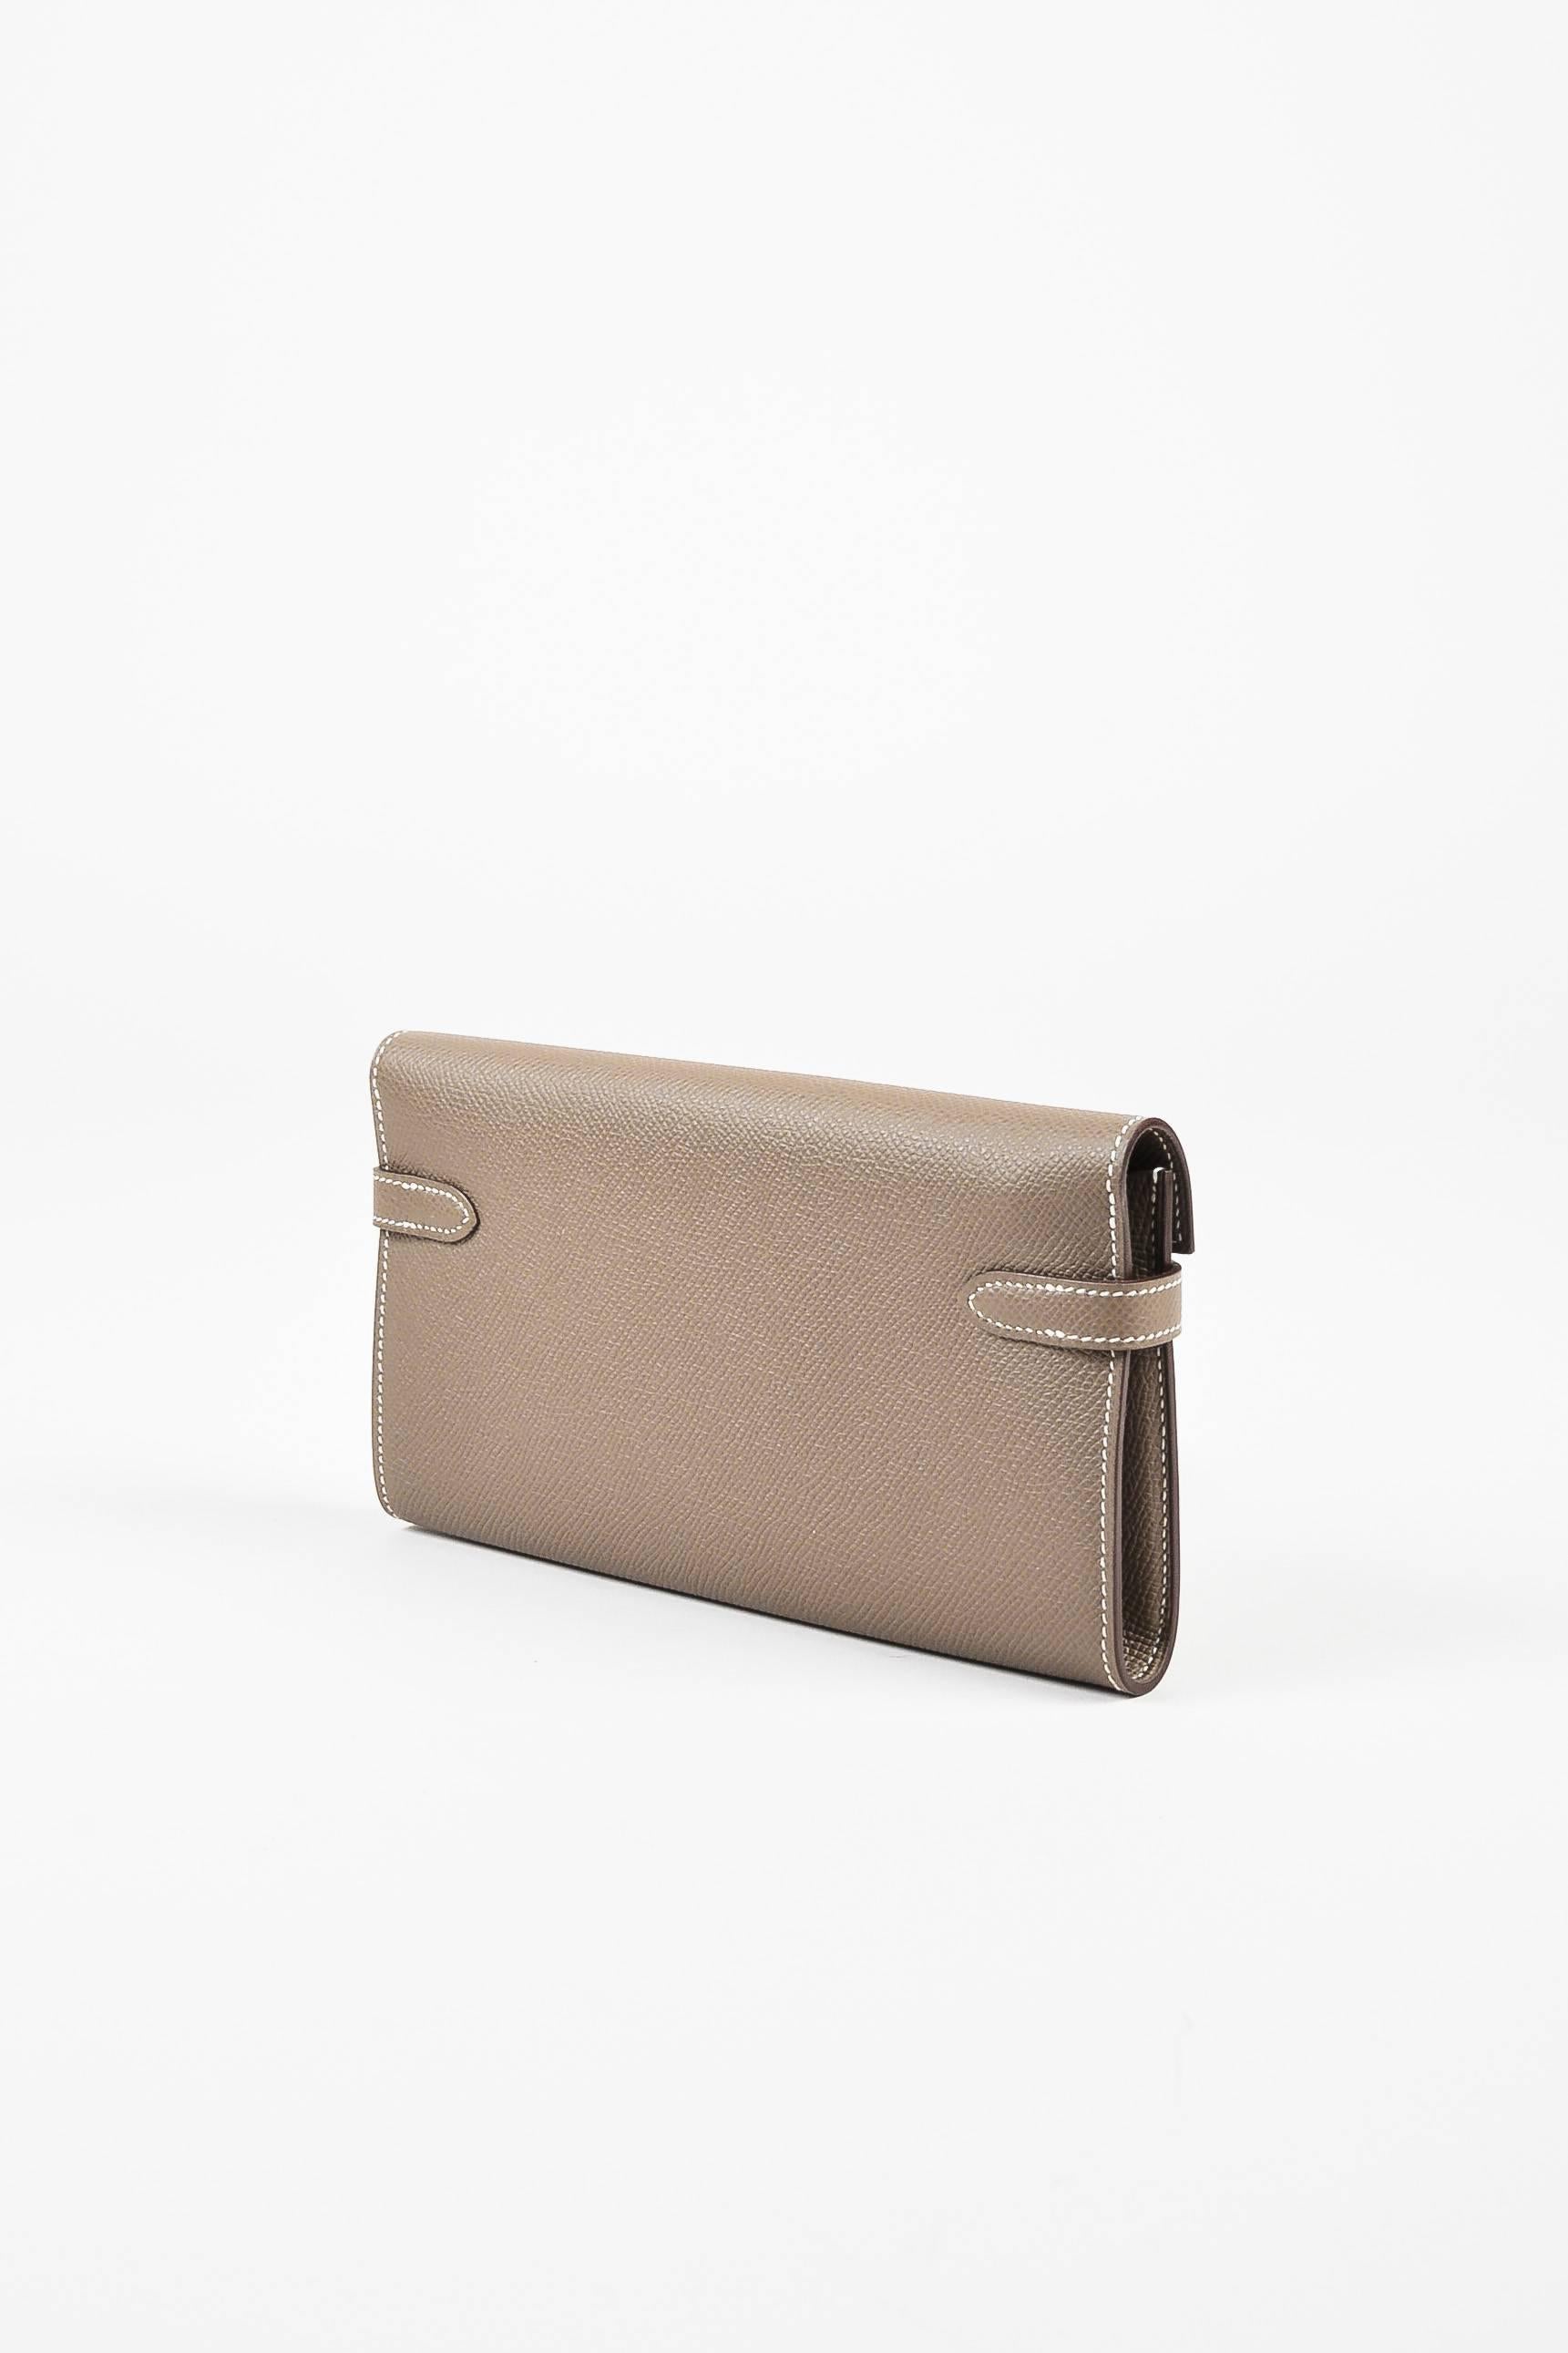 The timeless "Kelly" wallet is as chic as its namesake. Supple epsom leather construction. Silver-tone hardware. Front straight flap with plaque; sangle straps pull through touret. Two open compartments. Twelve card slots. Two billfold